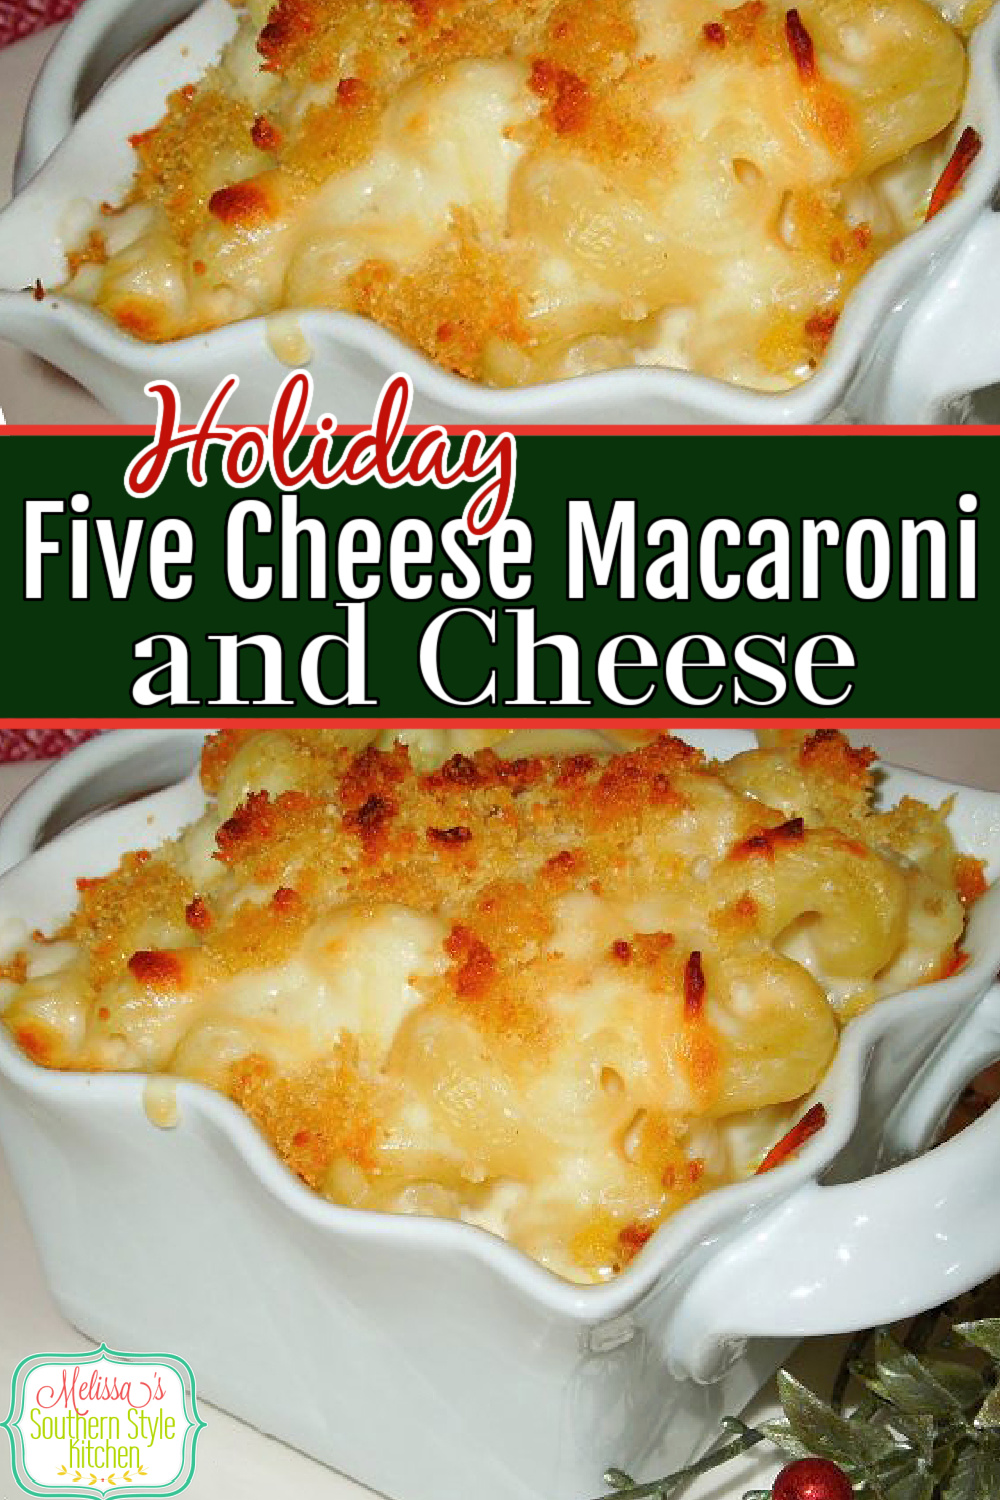 This 5 Cheese Holiday Macaroni and Cheese features a delicious blend of cheese that makes it a special dish for a special occasion #macaroniandcheese #macadncheese #cheese #pasta #casseroles #southernrecipes #southernfood #bestmacandcheese #macaroni via @melissasssk